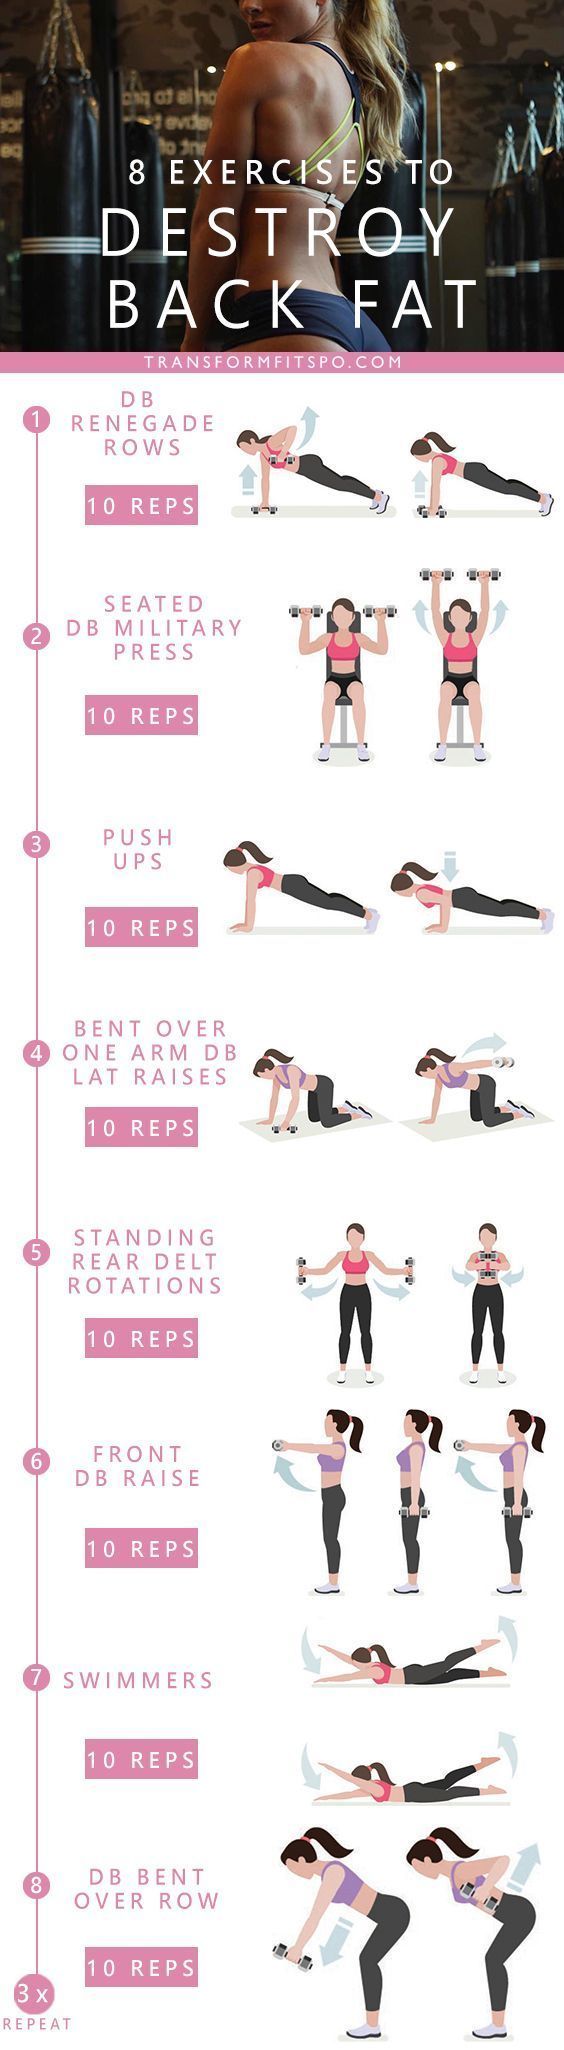 Fantastic Fat Loss workout plan you can do at home or at the gym. Use dumbbells or just your bodyweight — you decide! | Weight